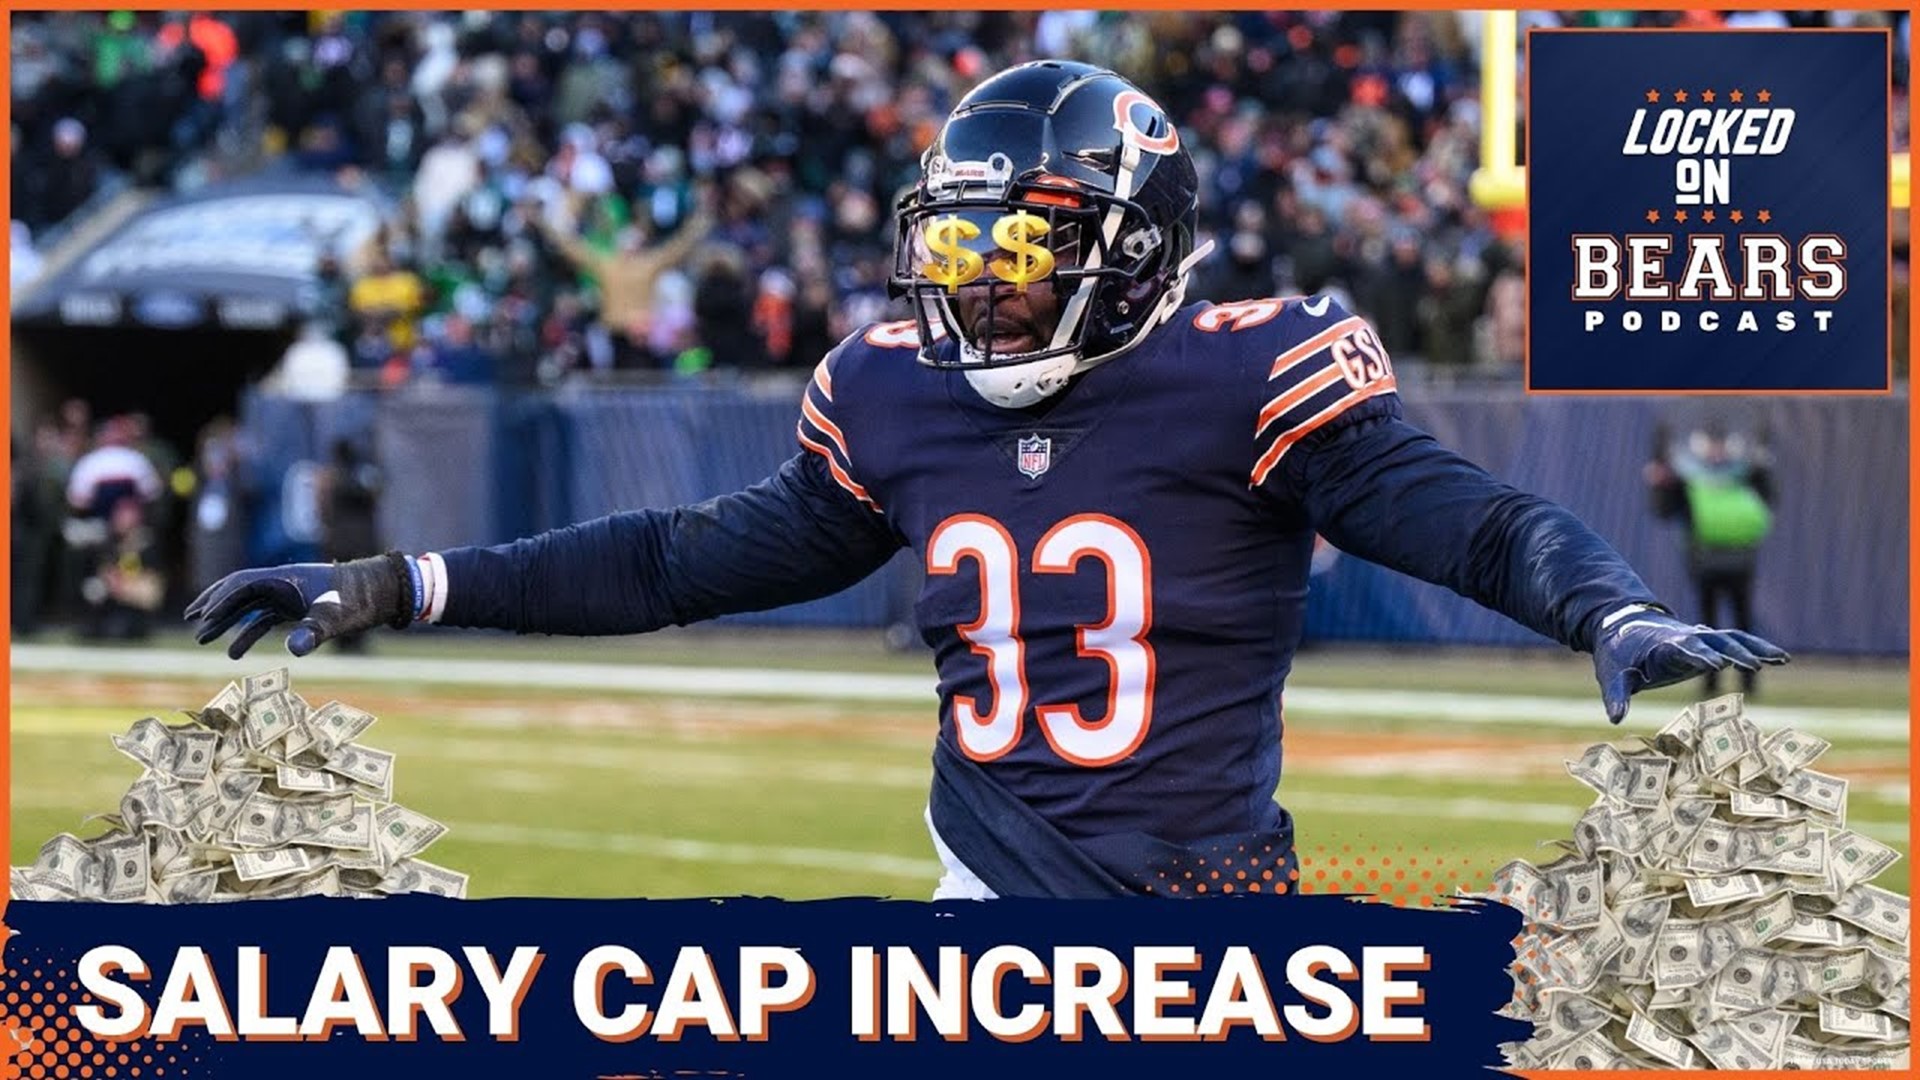 NFL salary cap increase means more cap space for Chicago Bears but